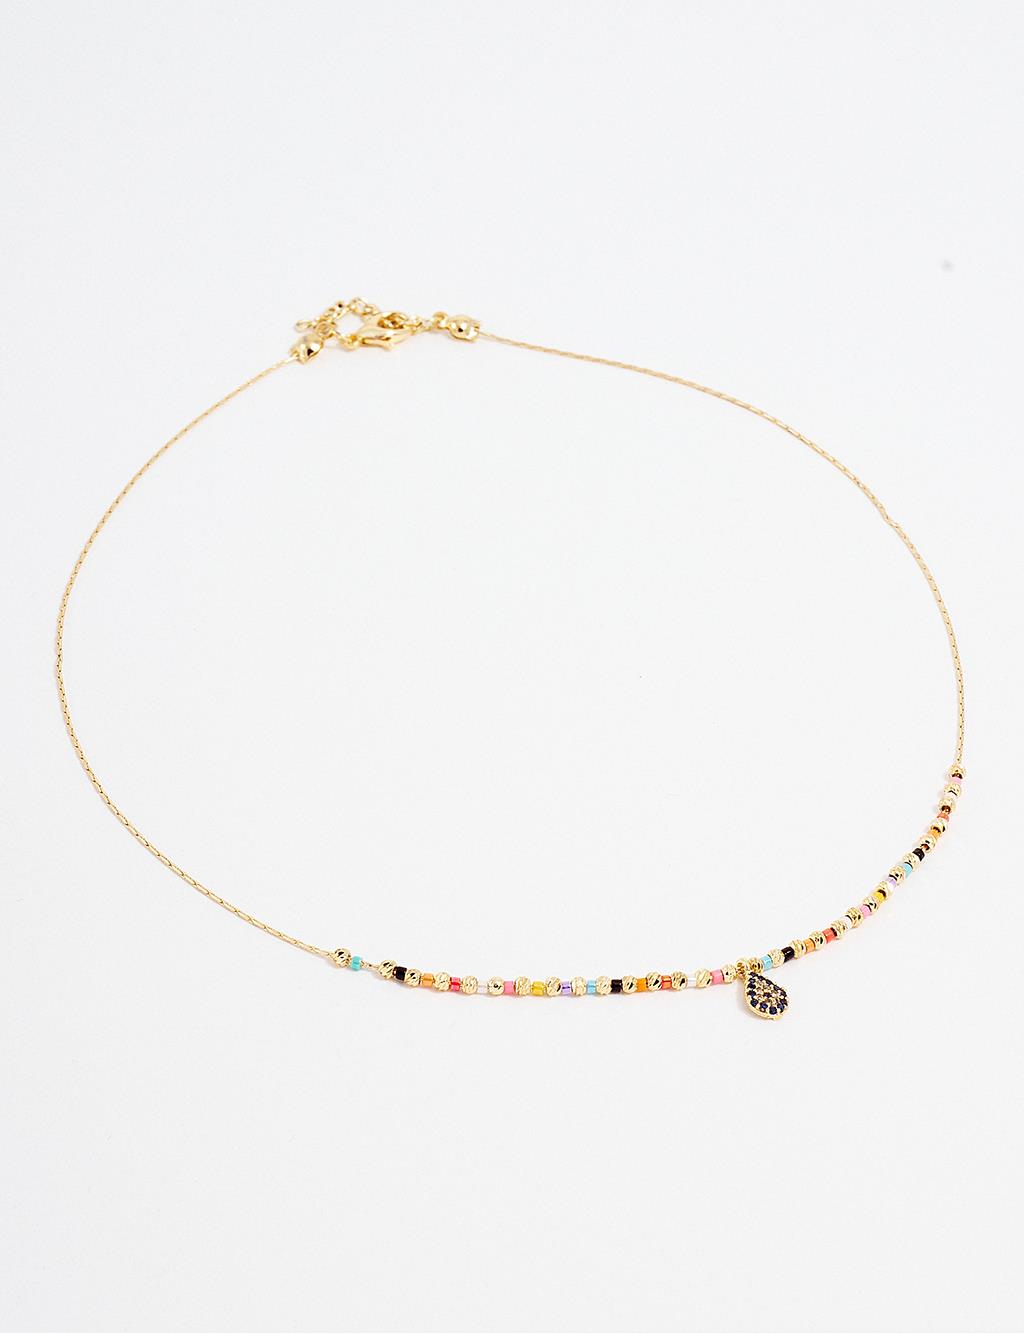 Colorful Bead Array Necklace Gold